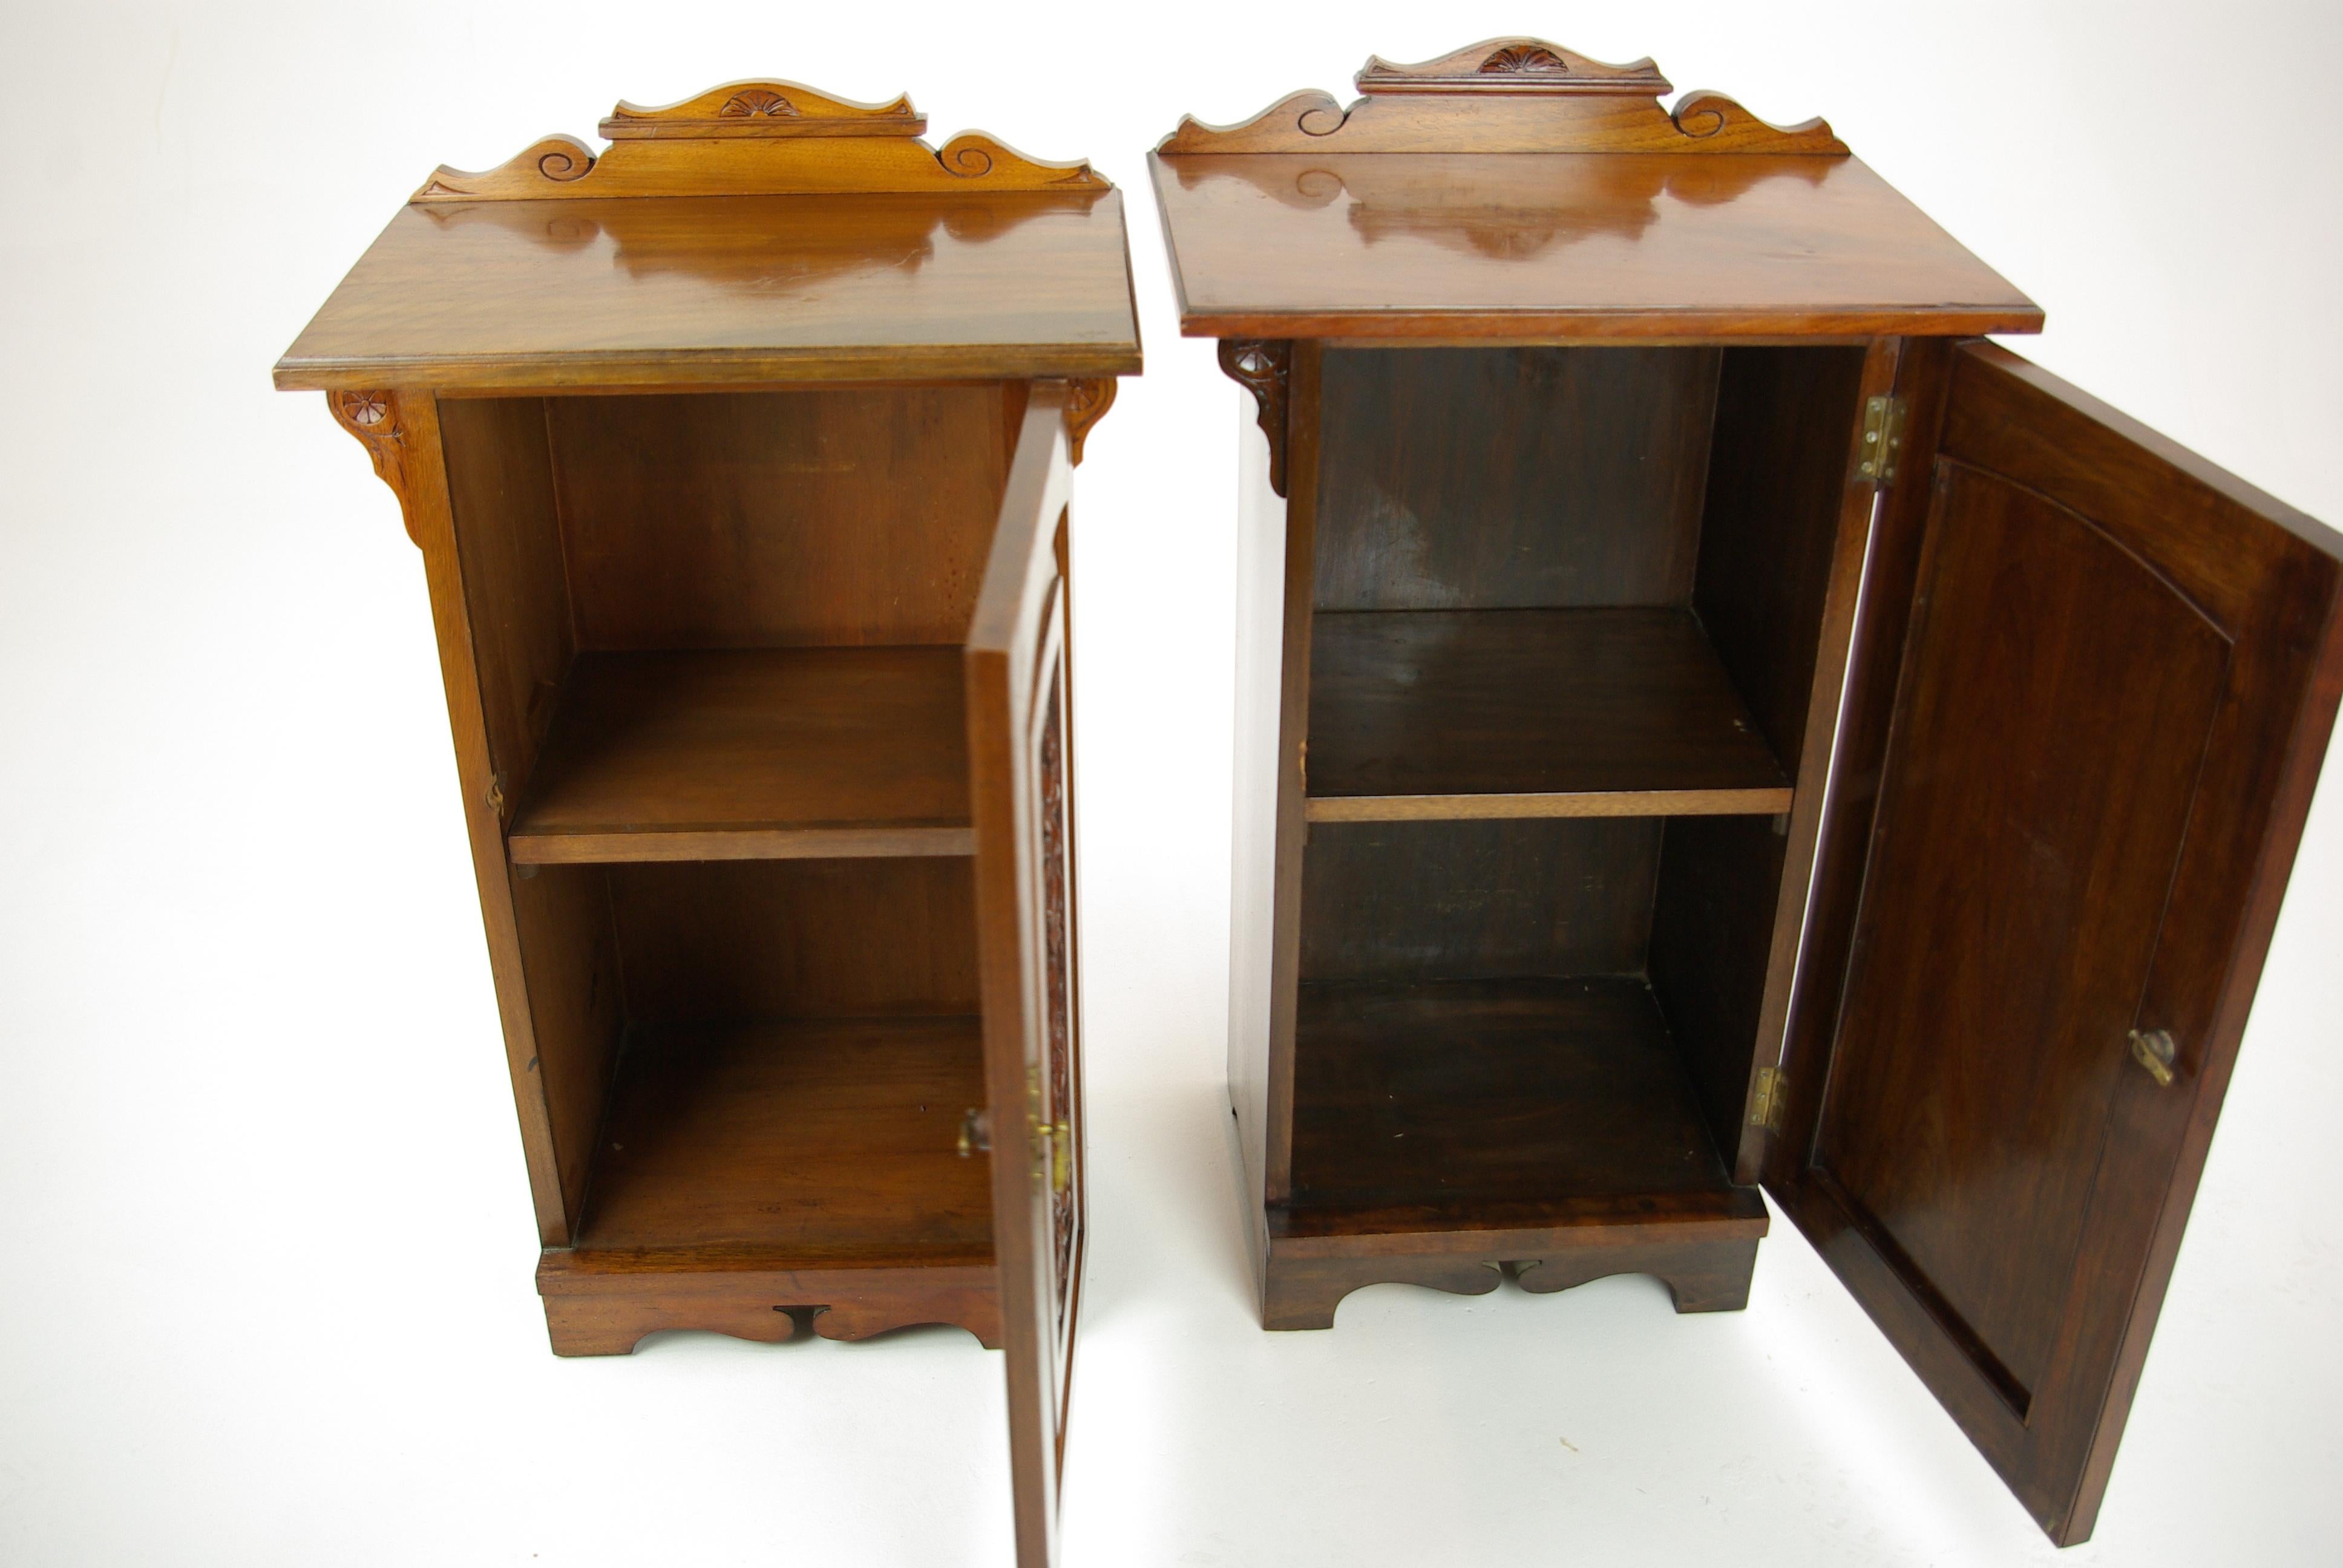 Scottish Antique Nightstands, Pair of Nightstands, Bedside Tables, Lamp Tables